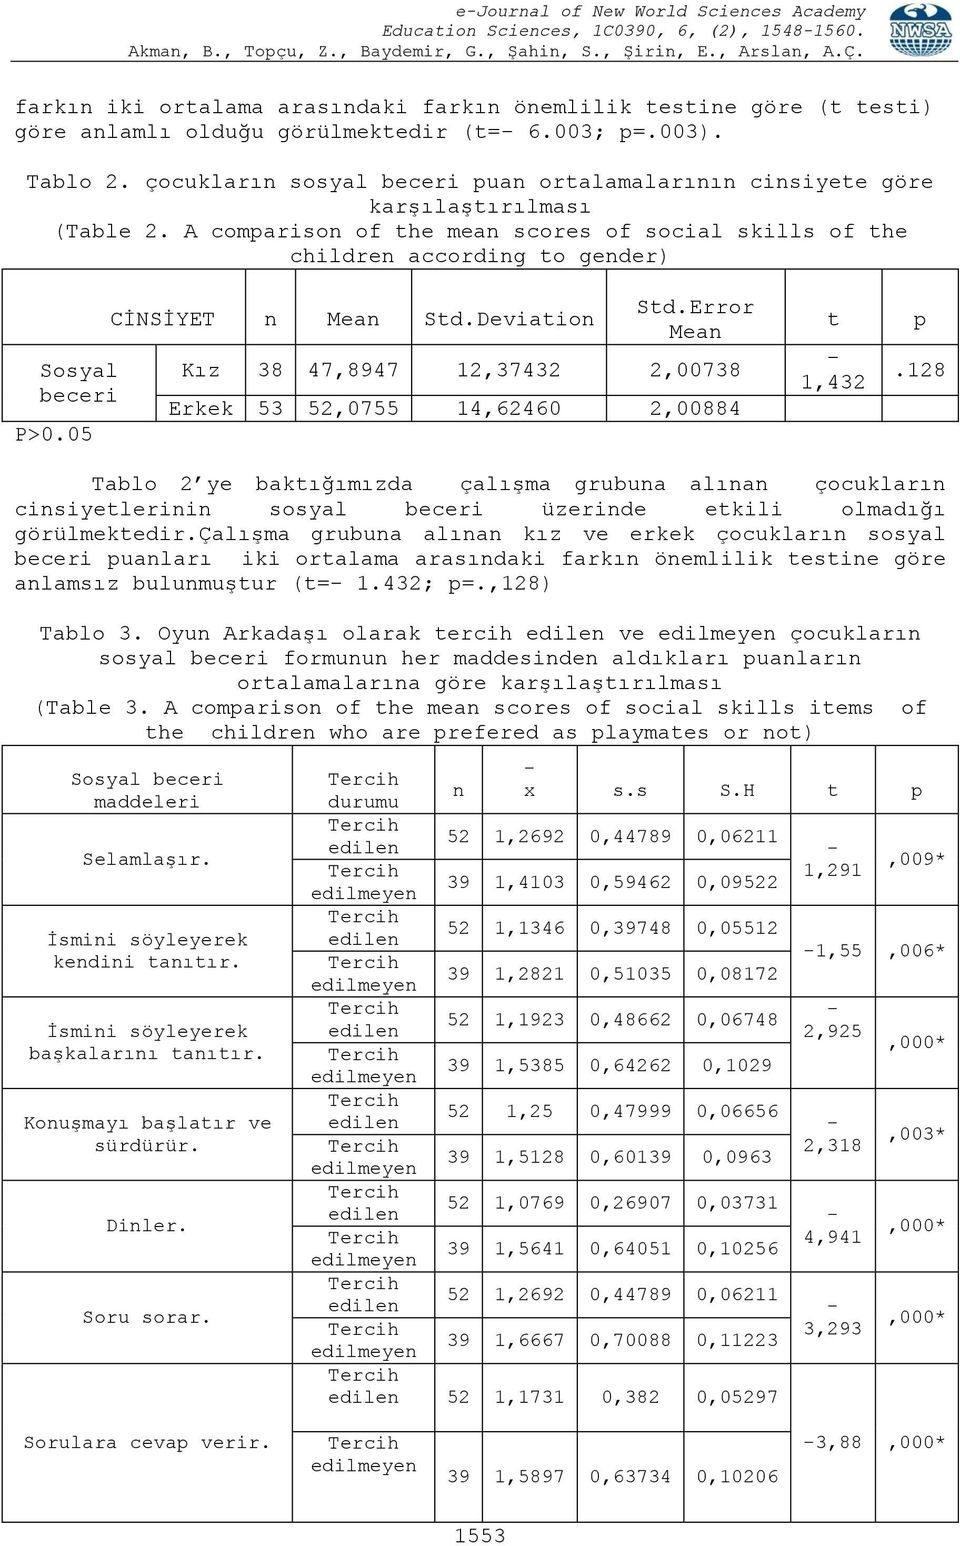 A comparison of the mean scores of social skills of the children according to gender) Sosyal beceri P>0.05 CİNSİYET n Mean Std.Deviation Std.